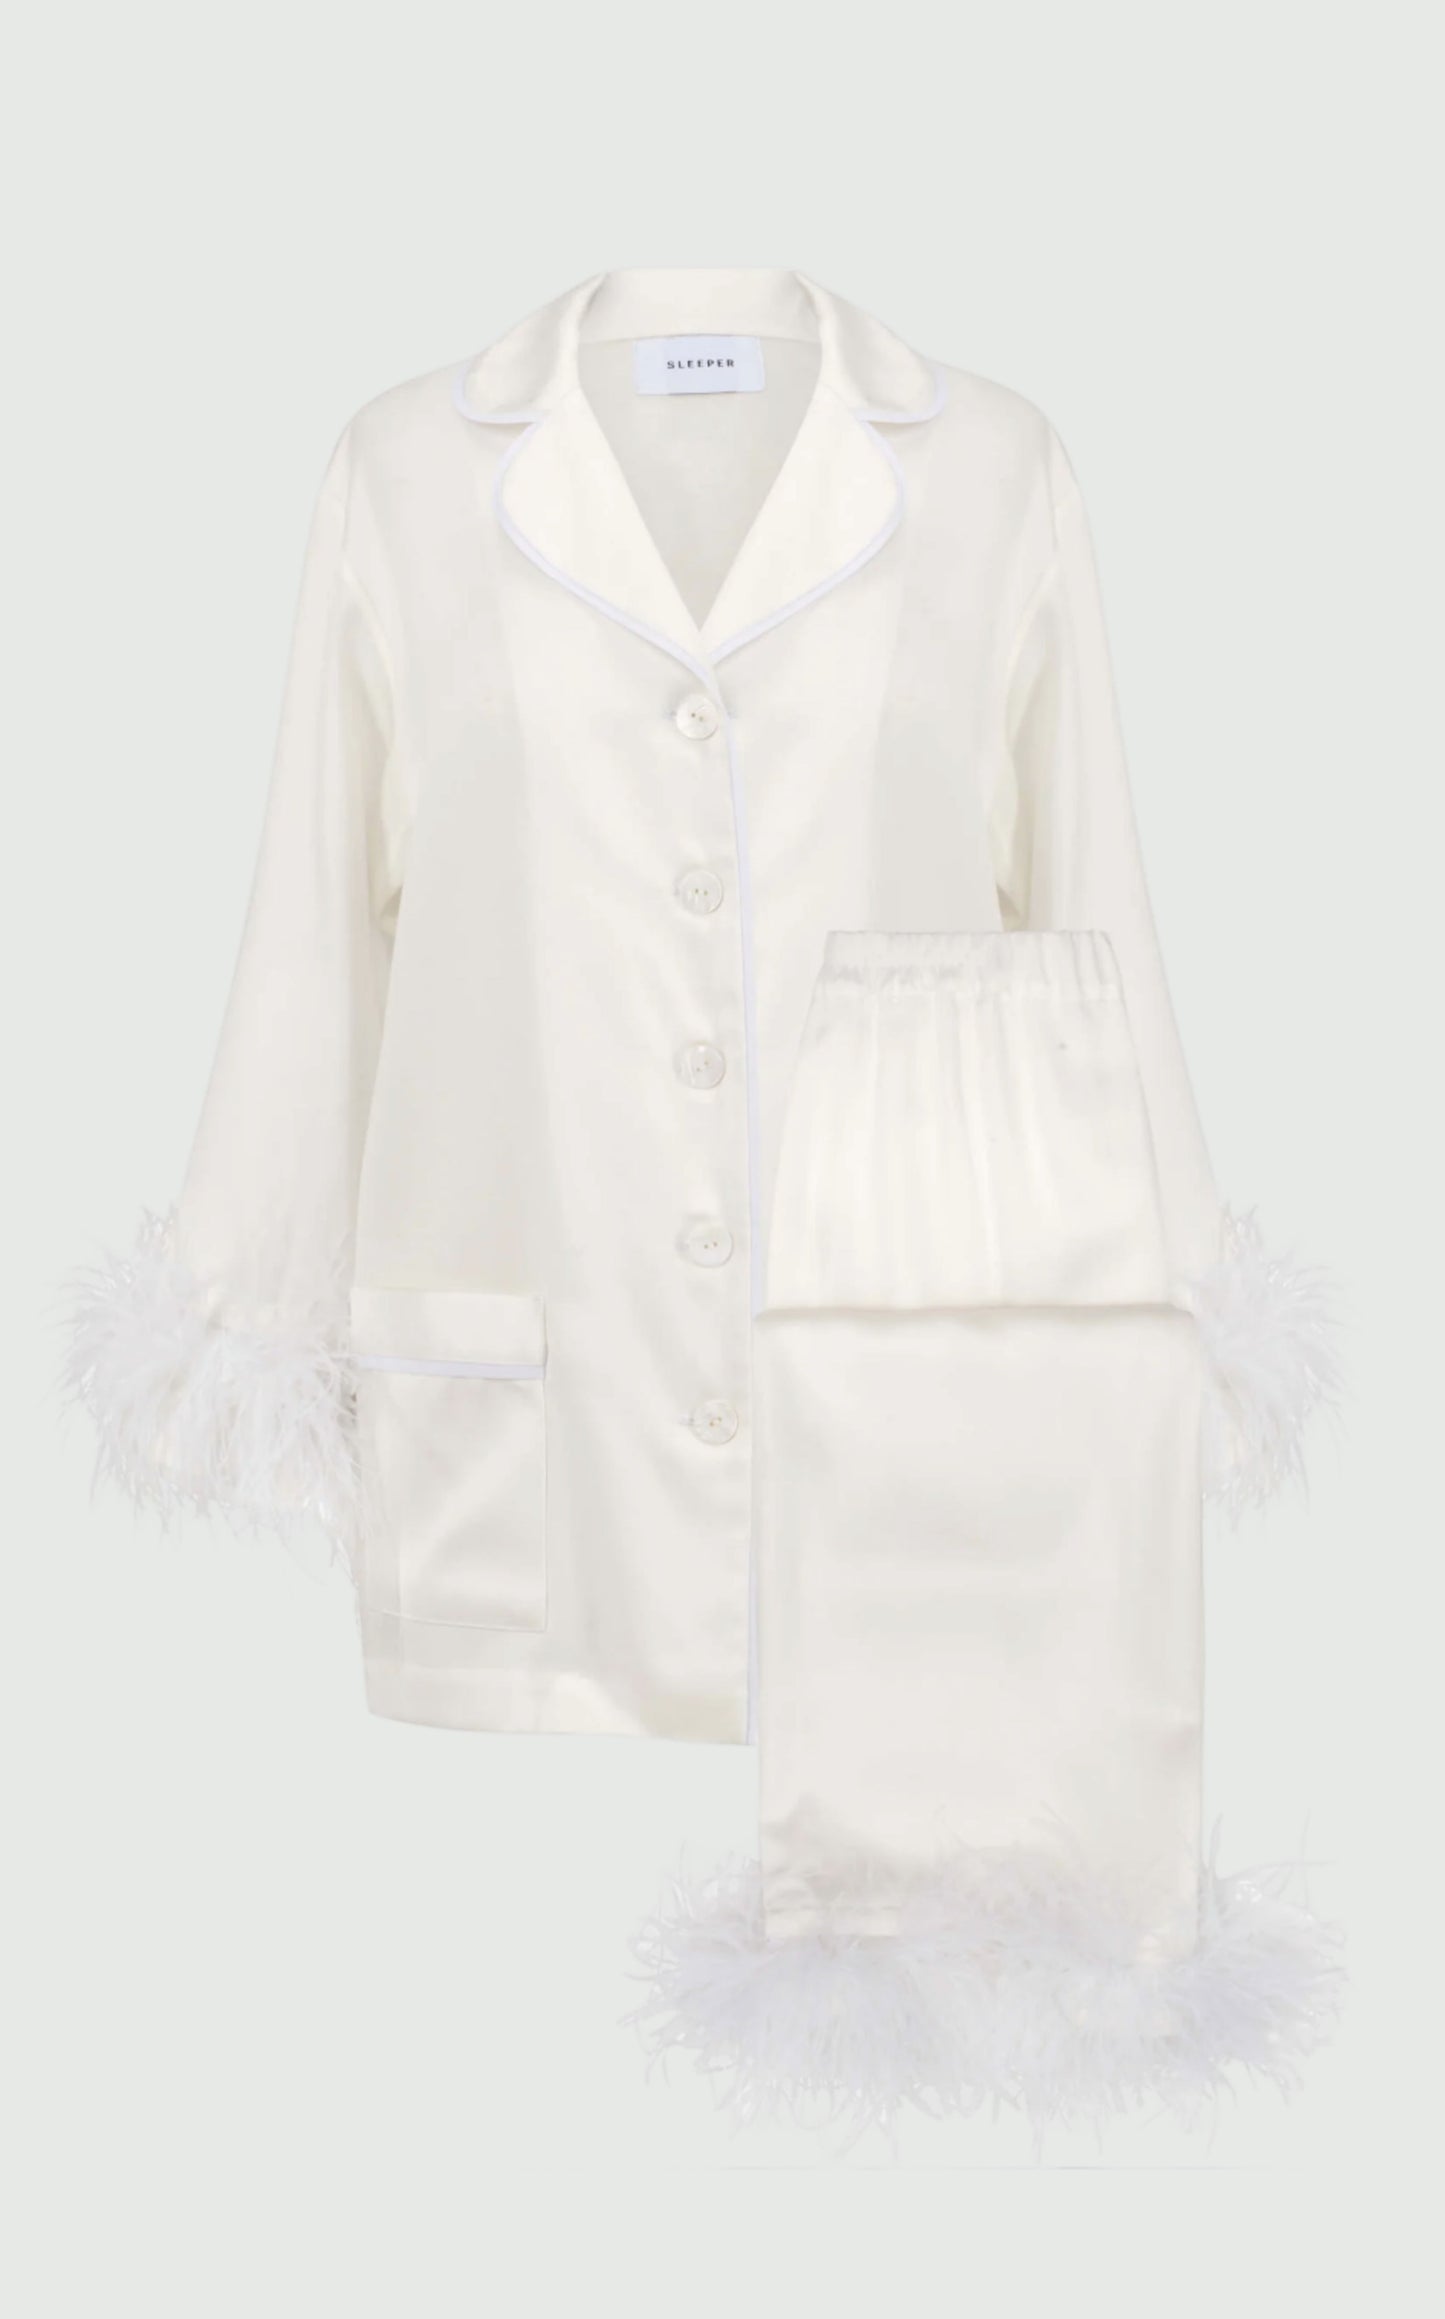 PARTY Pajama Set with Double Feathers